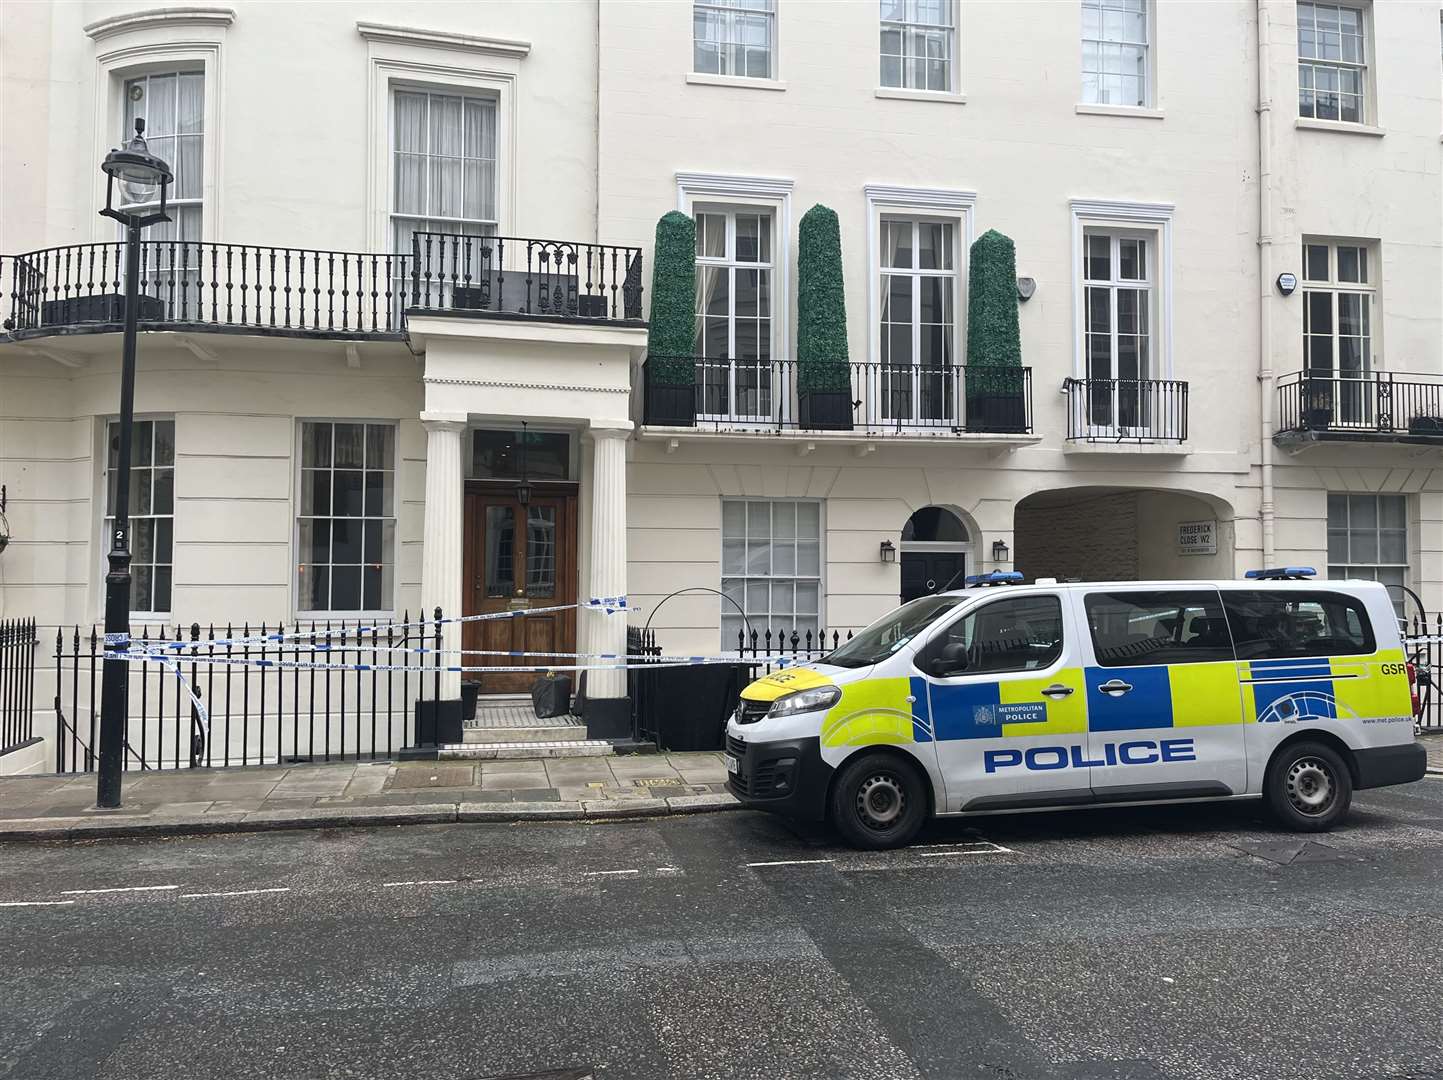 Police at the scene on Stanhope Place, Bayswater (William Warnes/PA)